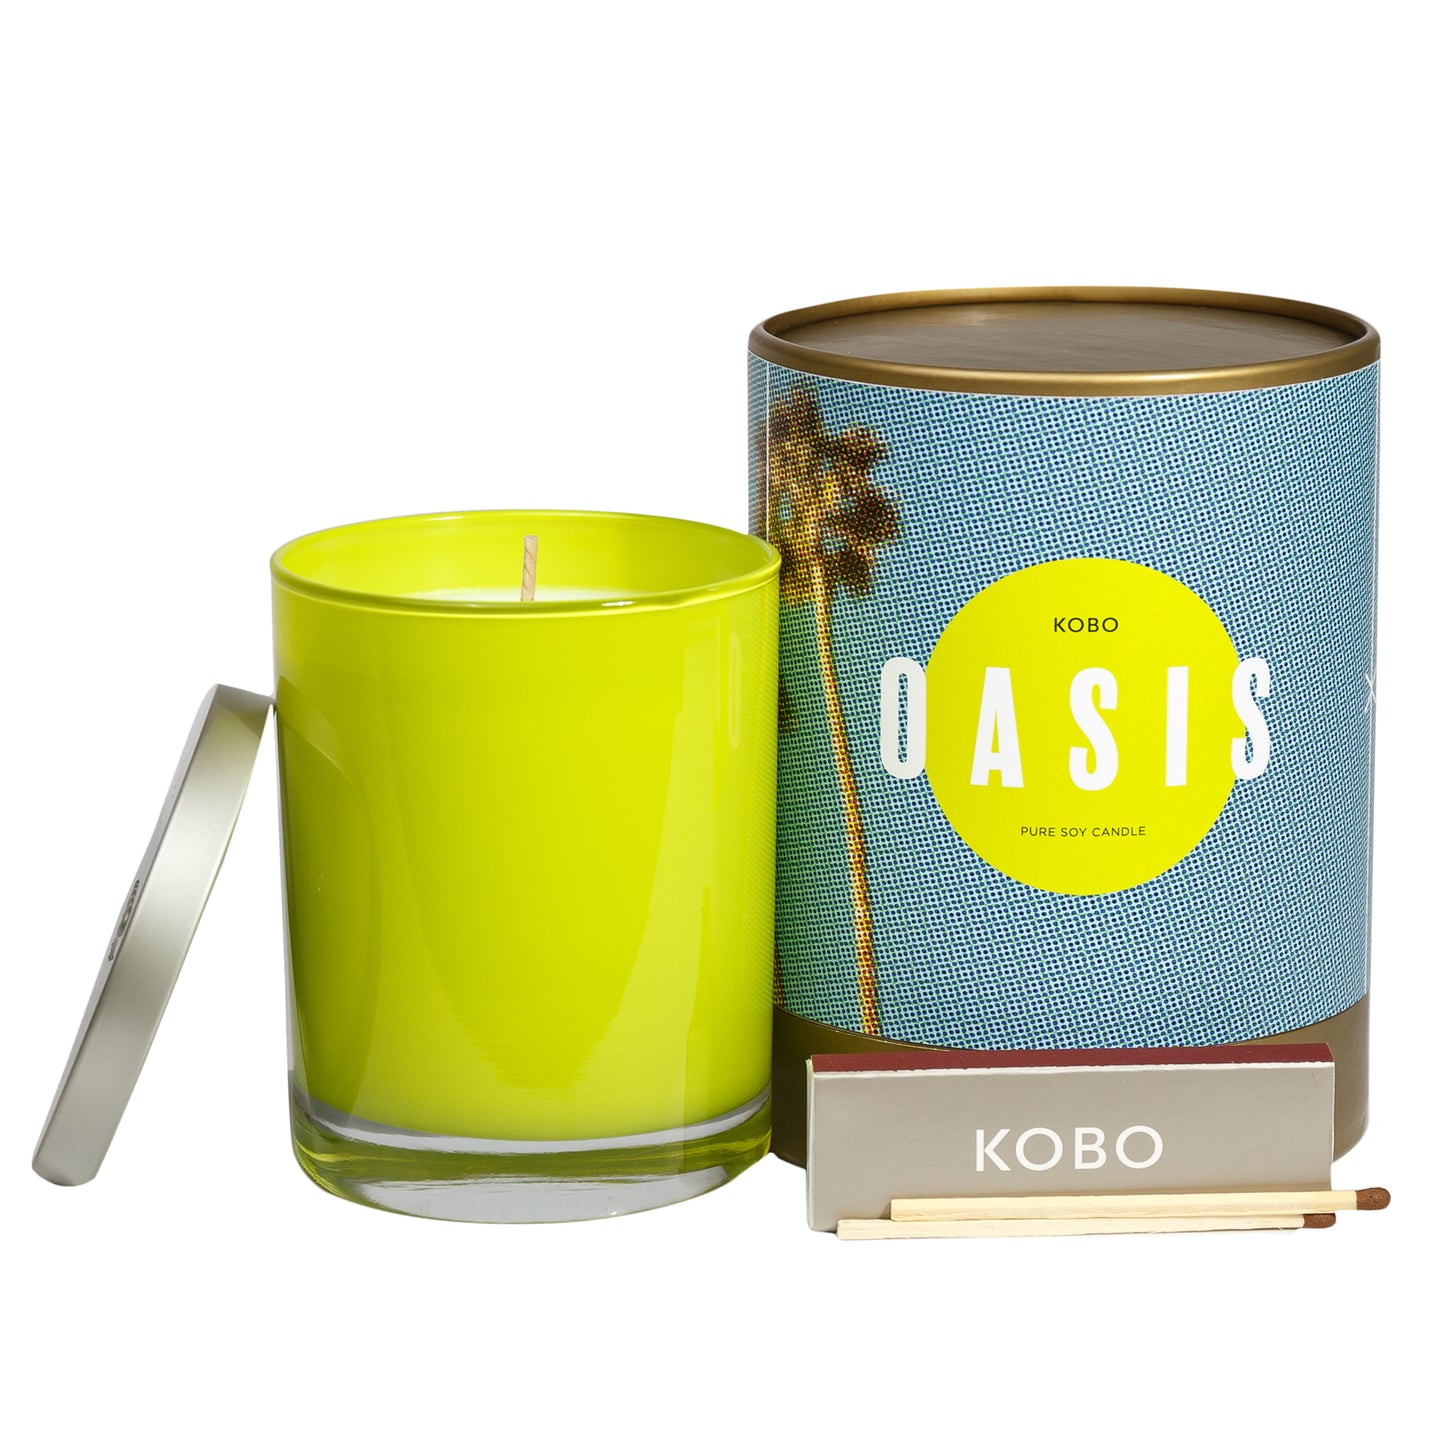 Primary Image of Oasis Road Trip Candle